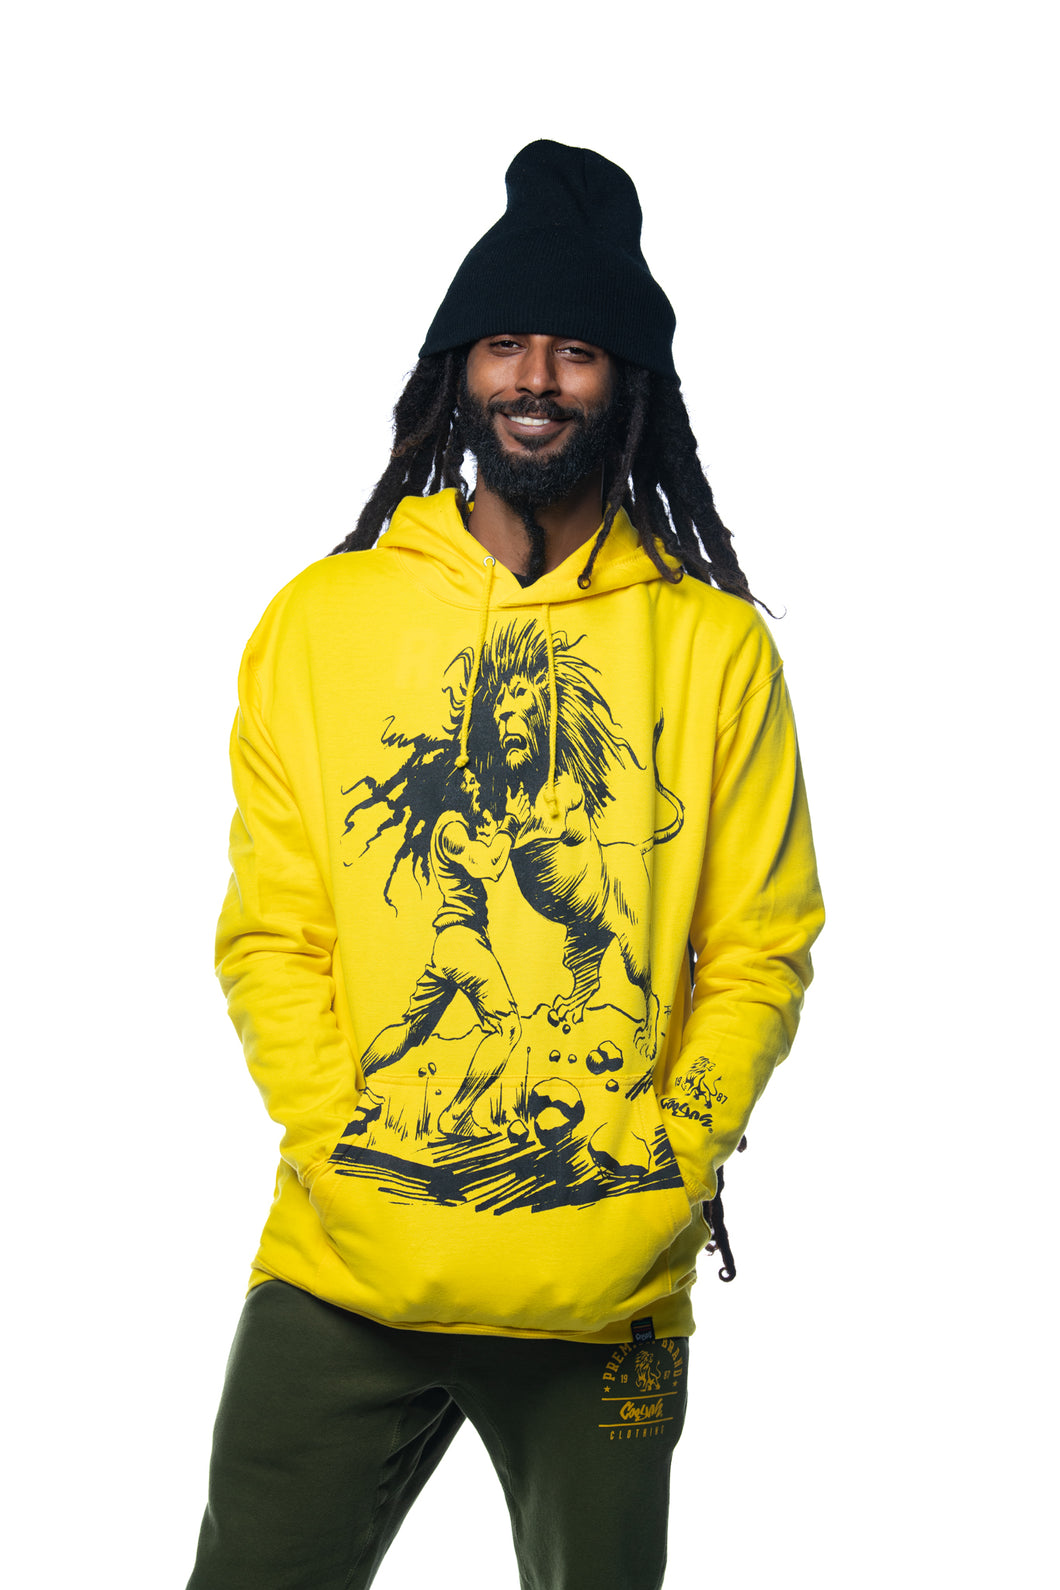 Cooyah Jamaica Men's Dread and Lion hoodies in yellow with reggae style print.  Jamaican streetwear clothing.